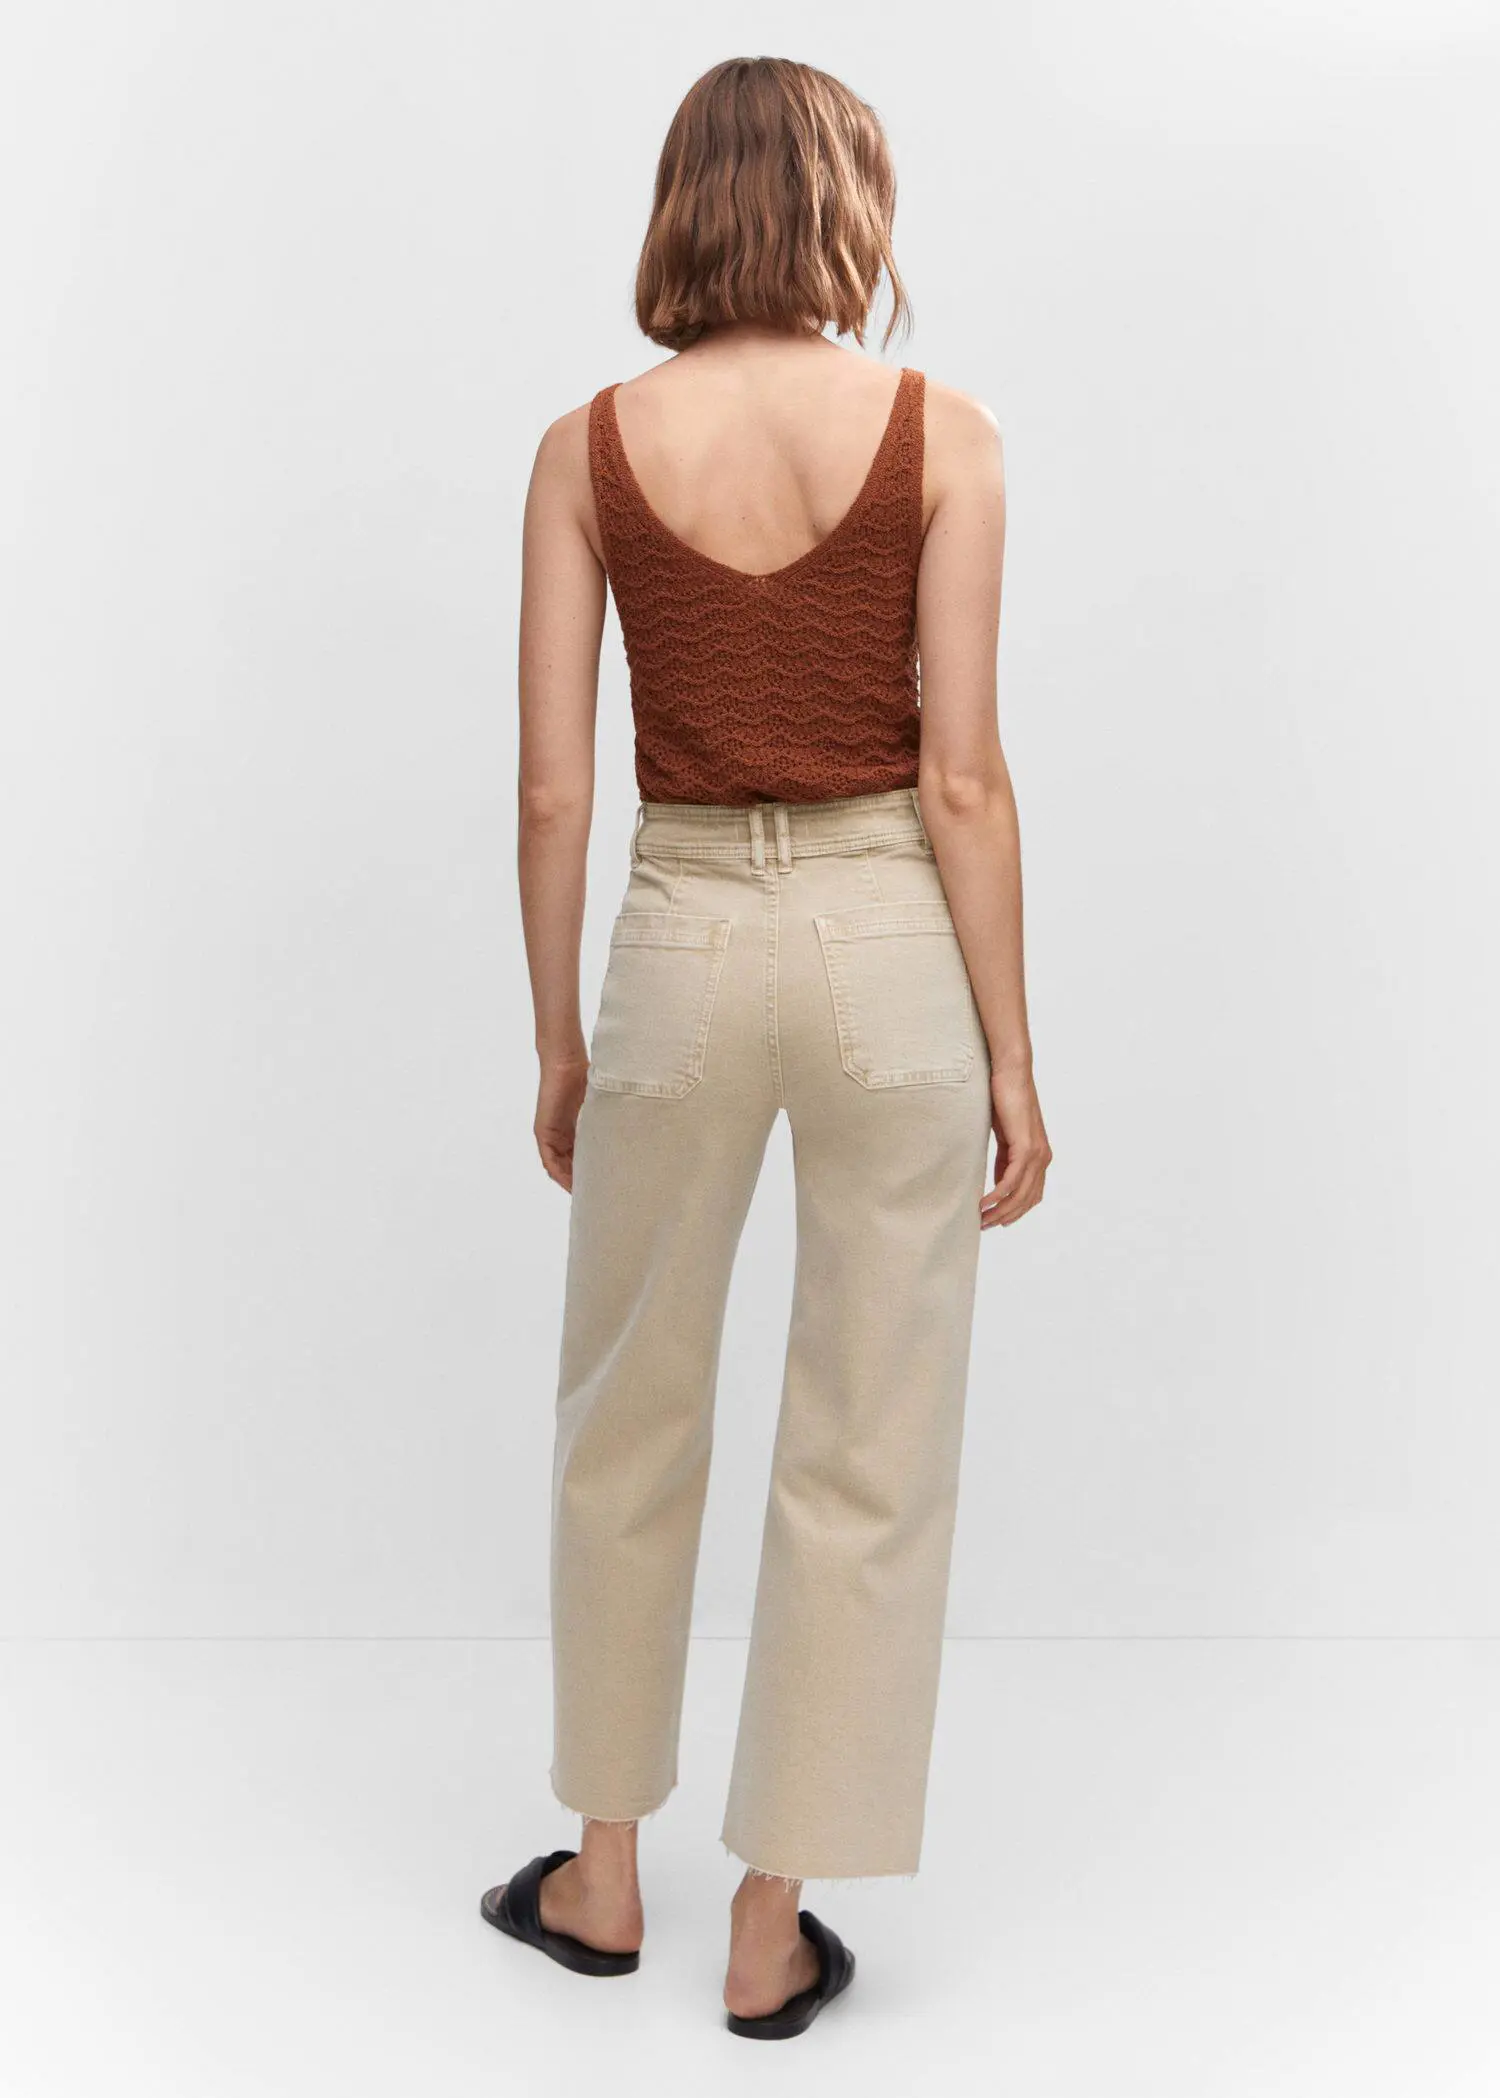 Mango Jeans culotte high waist. a person wearing a brown top and beige pants. 